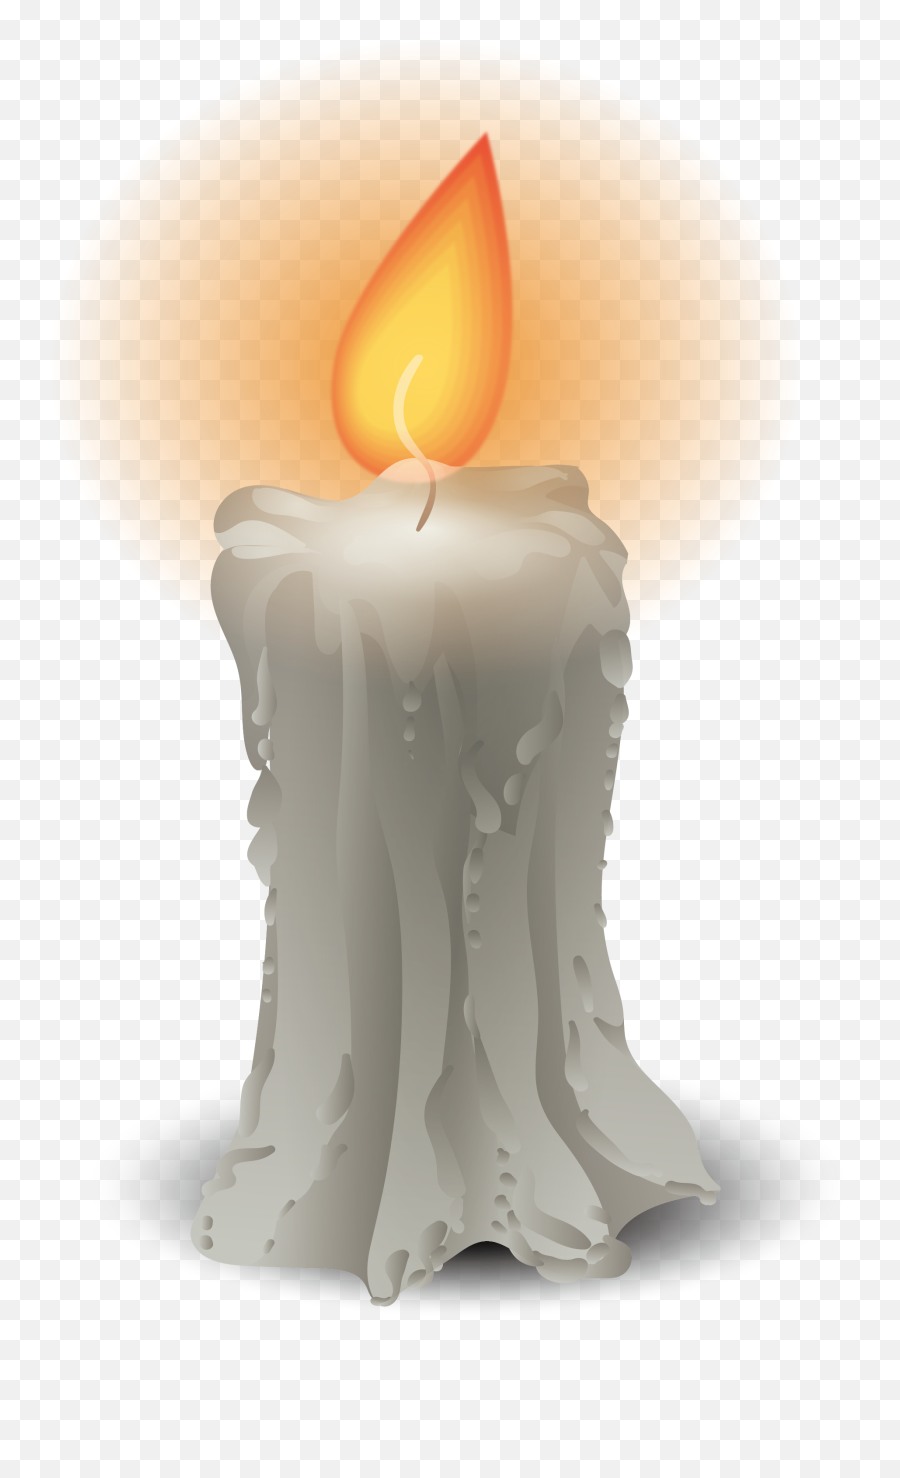 Candle Combustion Wax - Transparent Background Candle Clip Art Emoji,Emoji Candles